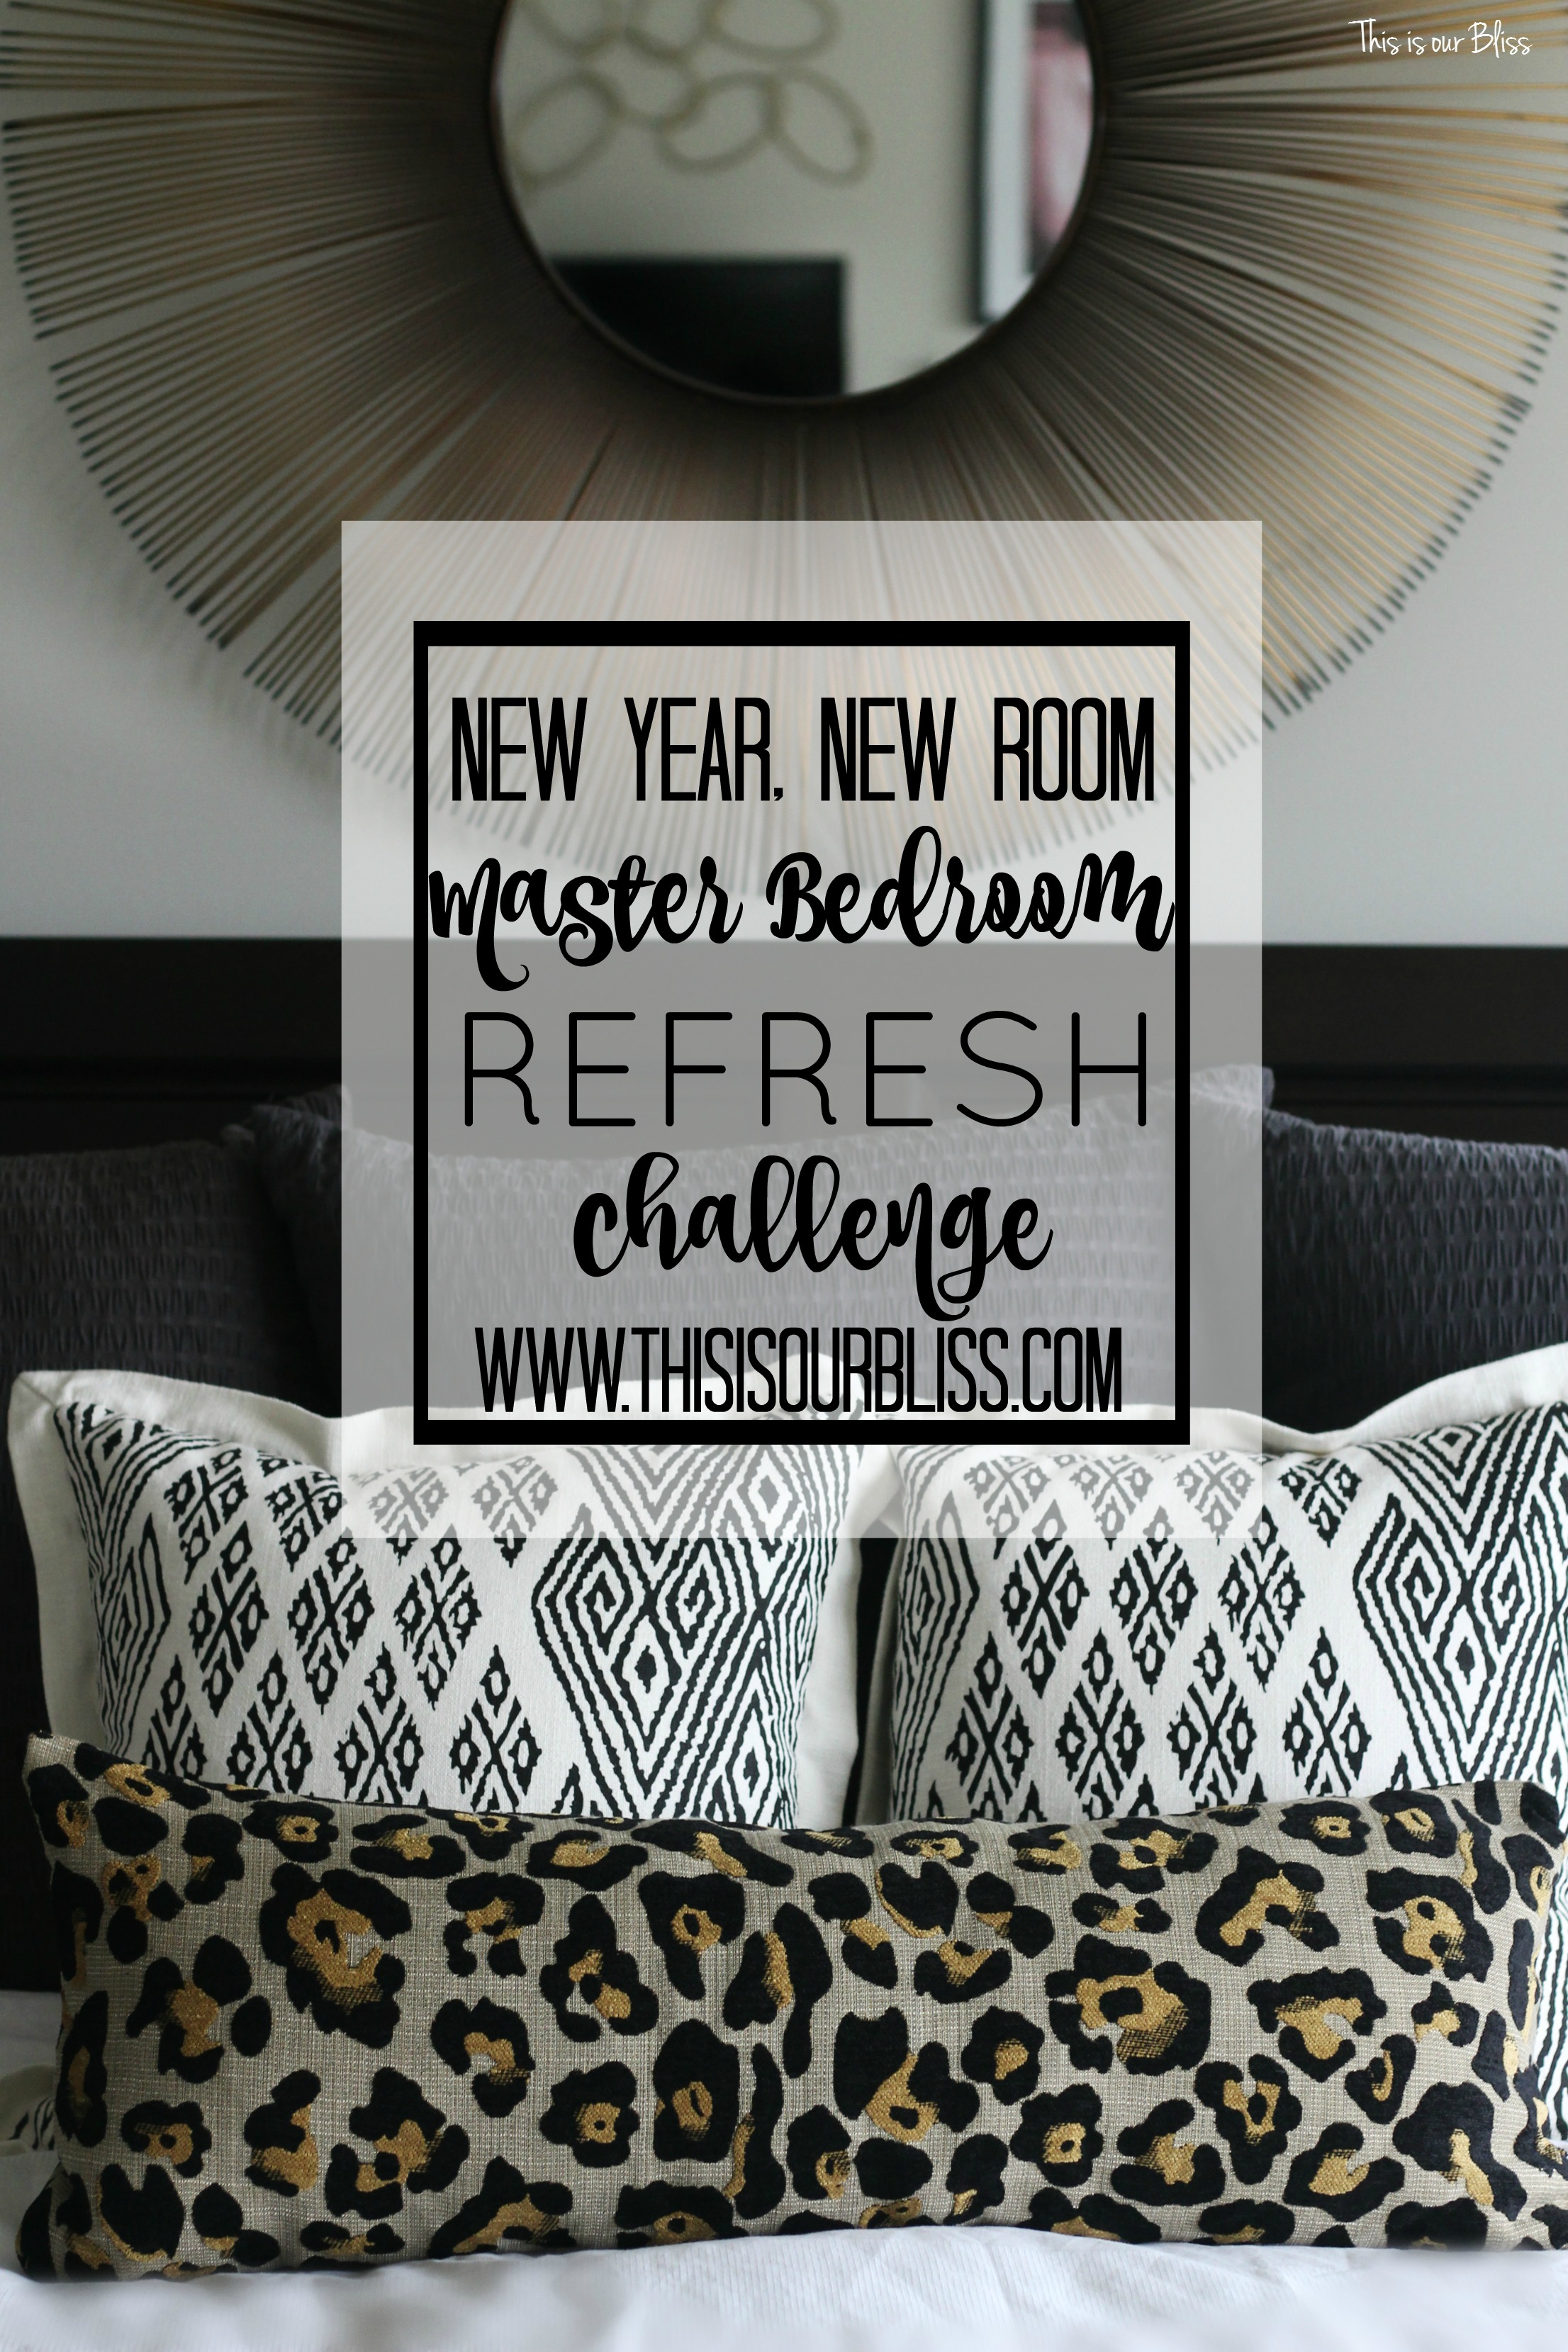 new year, new room refresh challenge - Master bedroom refresh - gold decor - pattern play - This is our Bliss